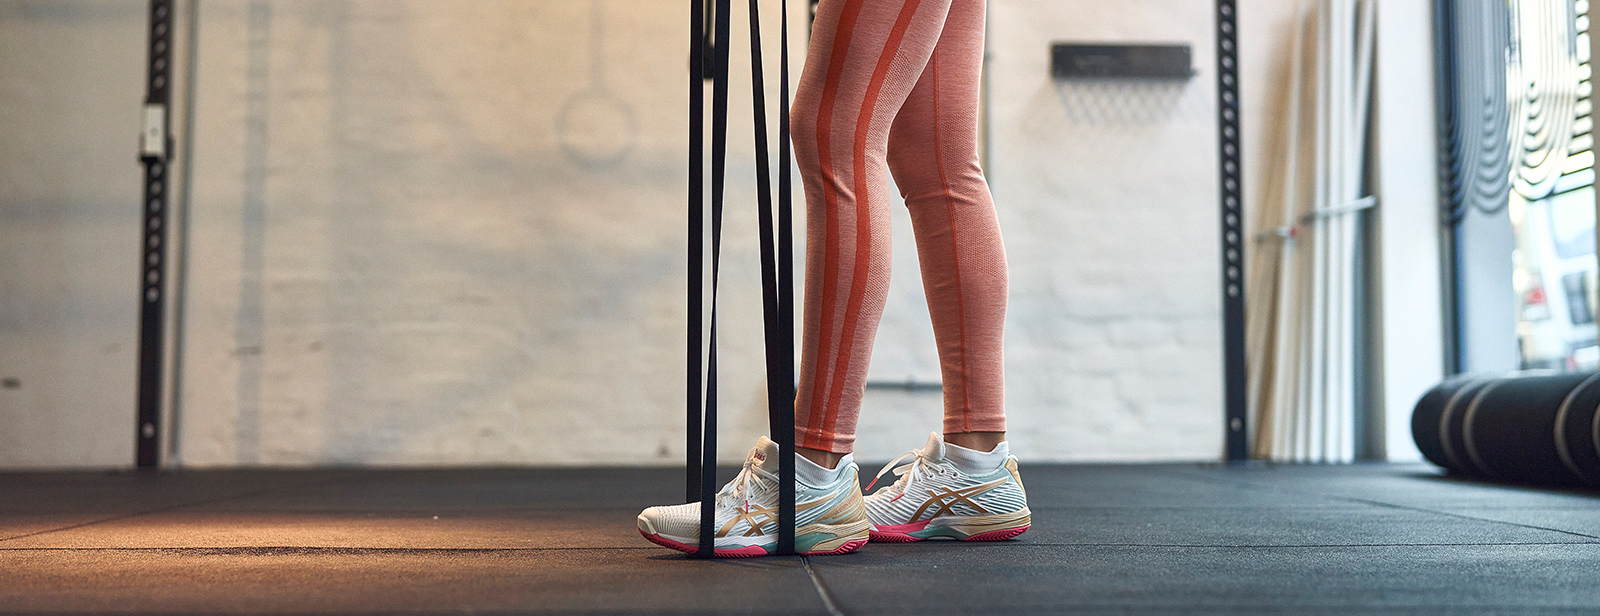 Resistance Band Training: How It Can Help Your Run